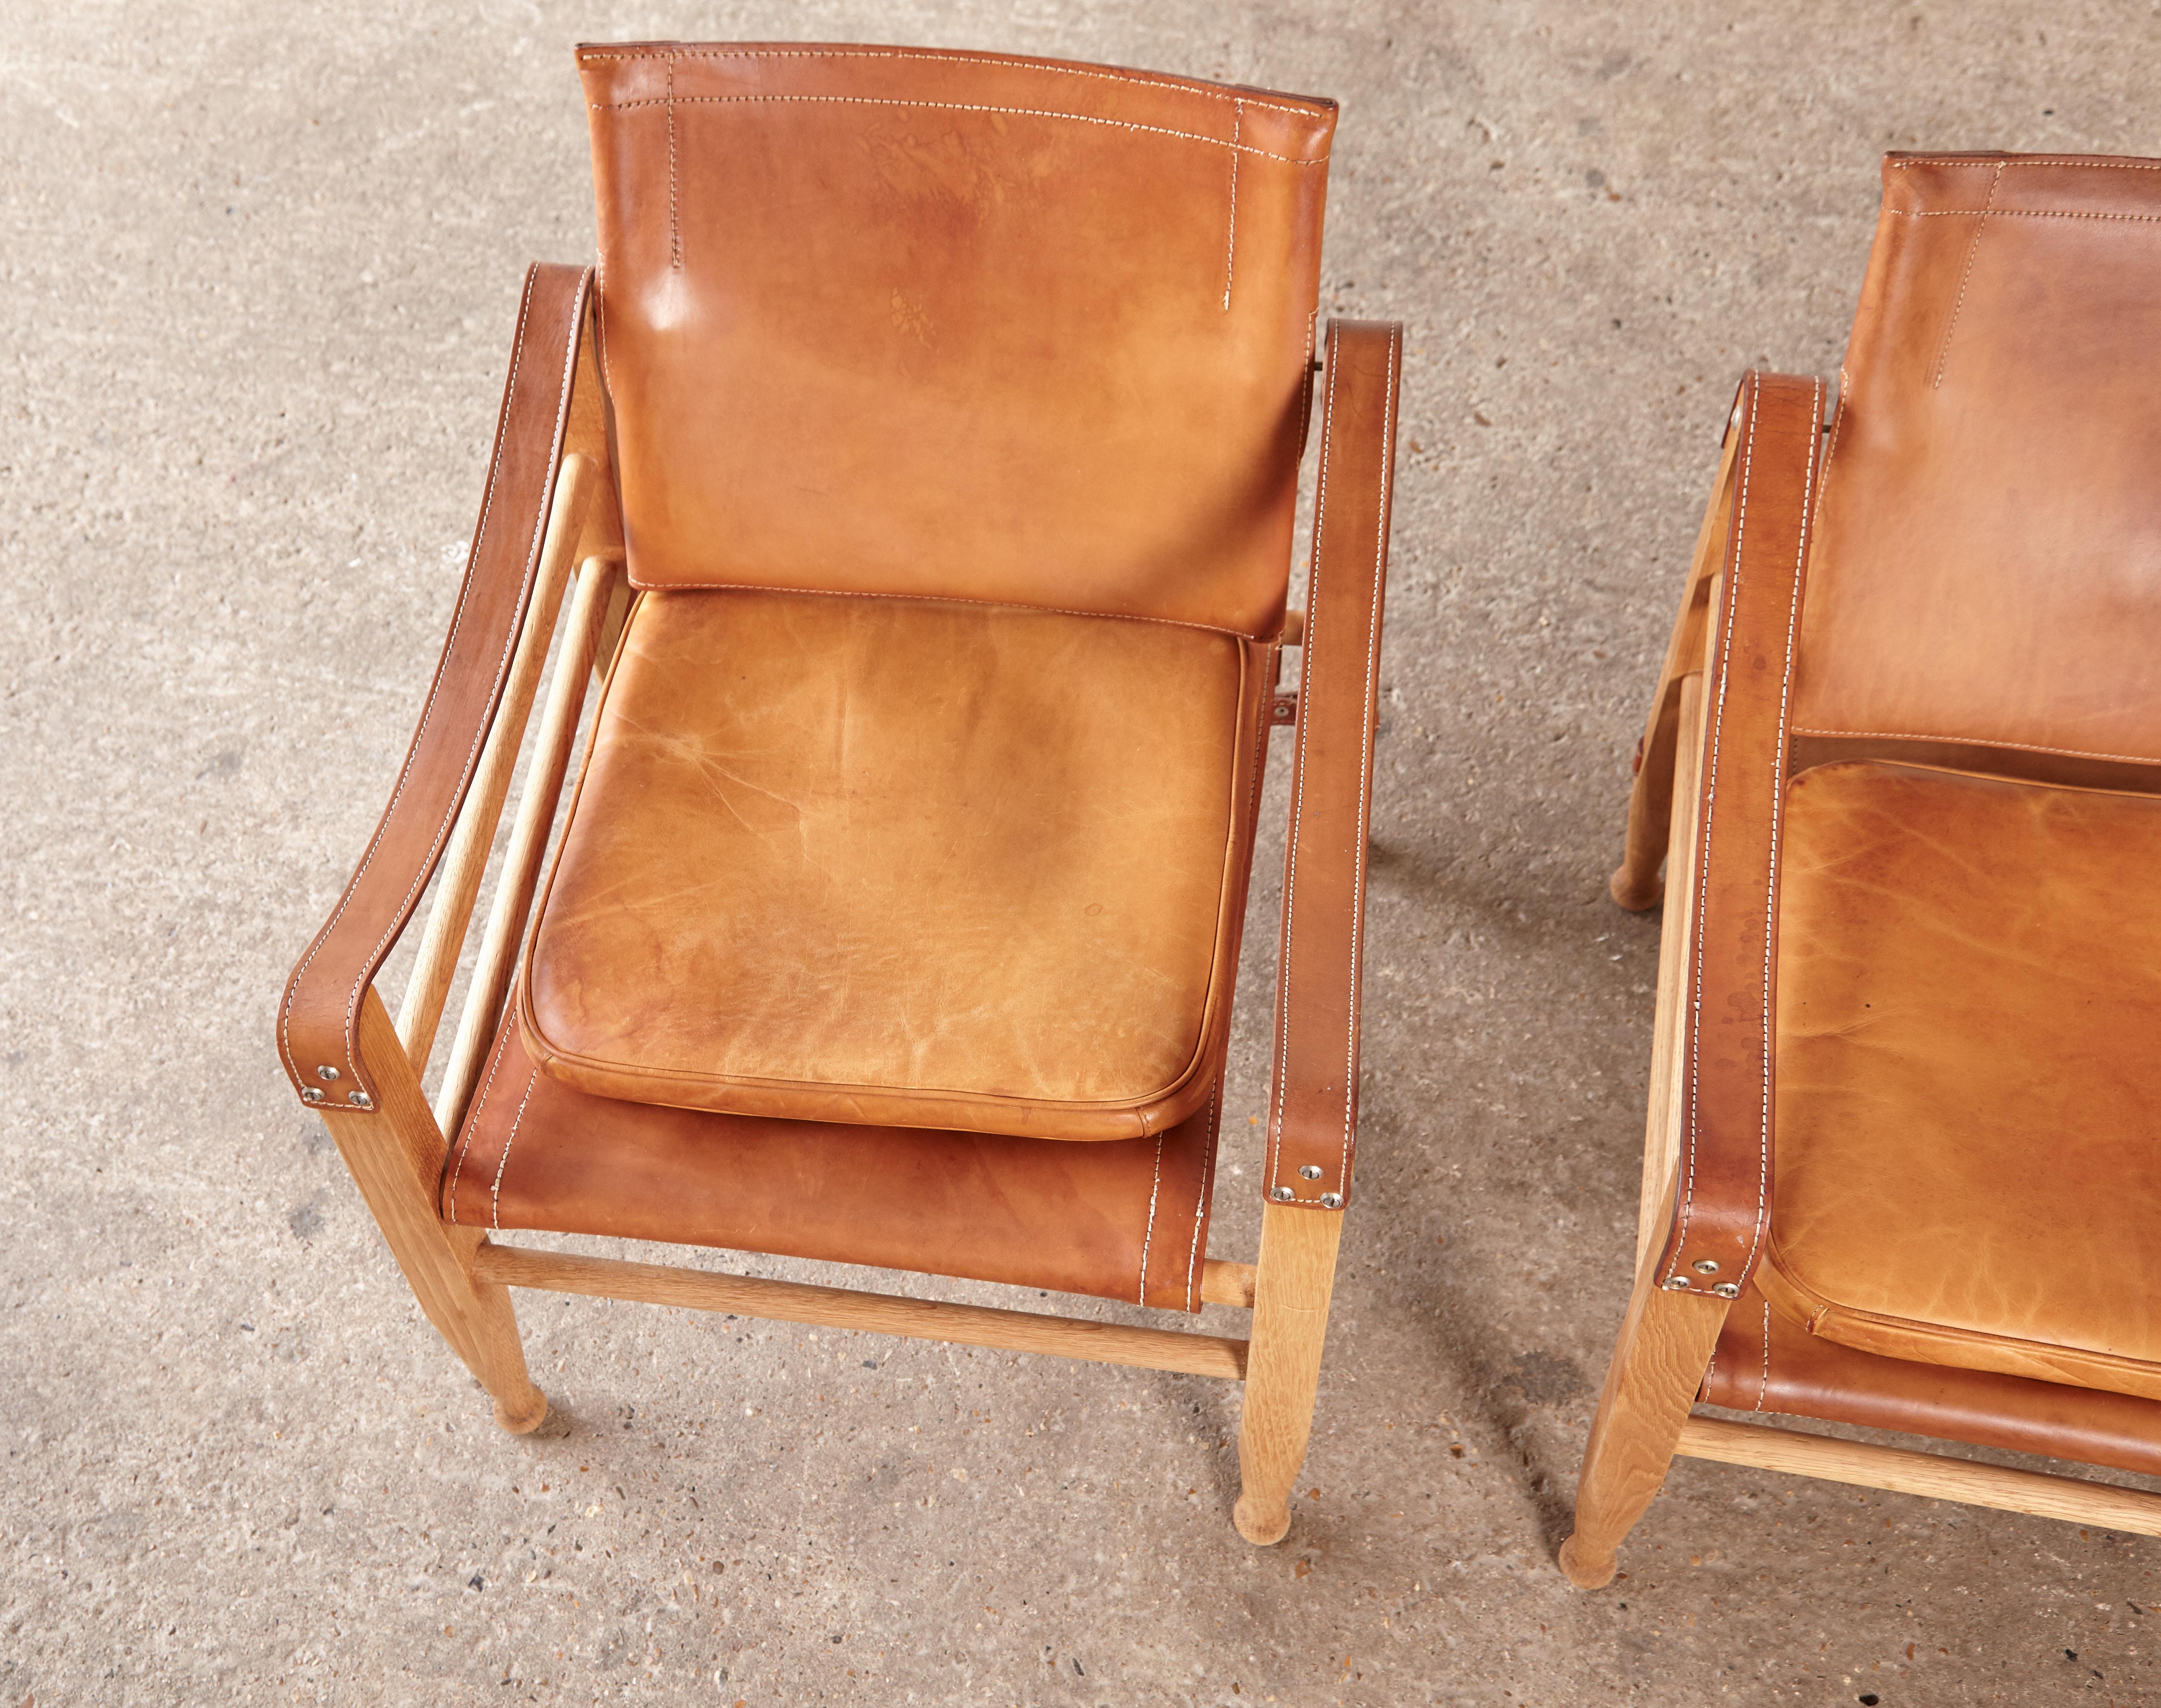 Aage Bruun and Son Safari Chairs in Patinated Tan Leather, Denmark, 1960s 6